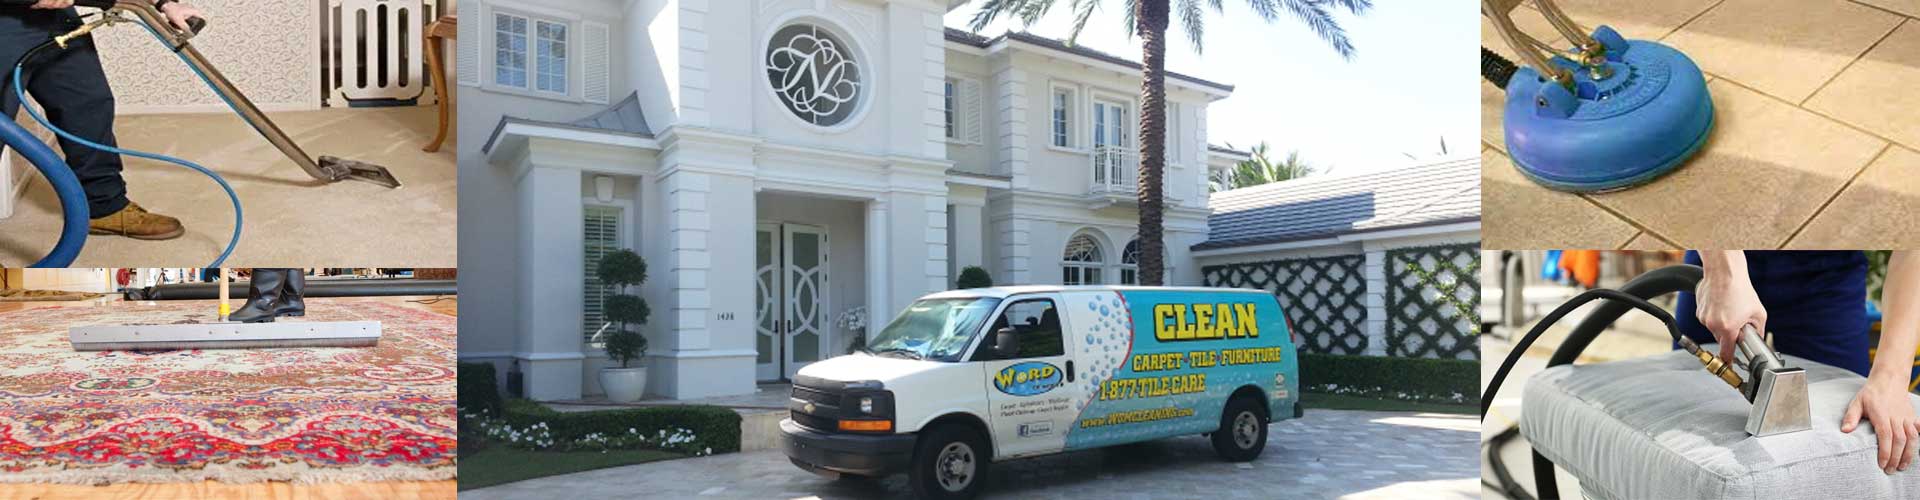 Carpet and Tile Cleaning Serving South Florida